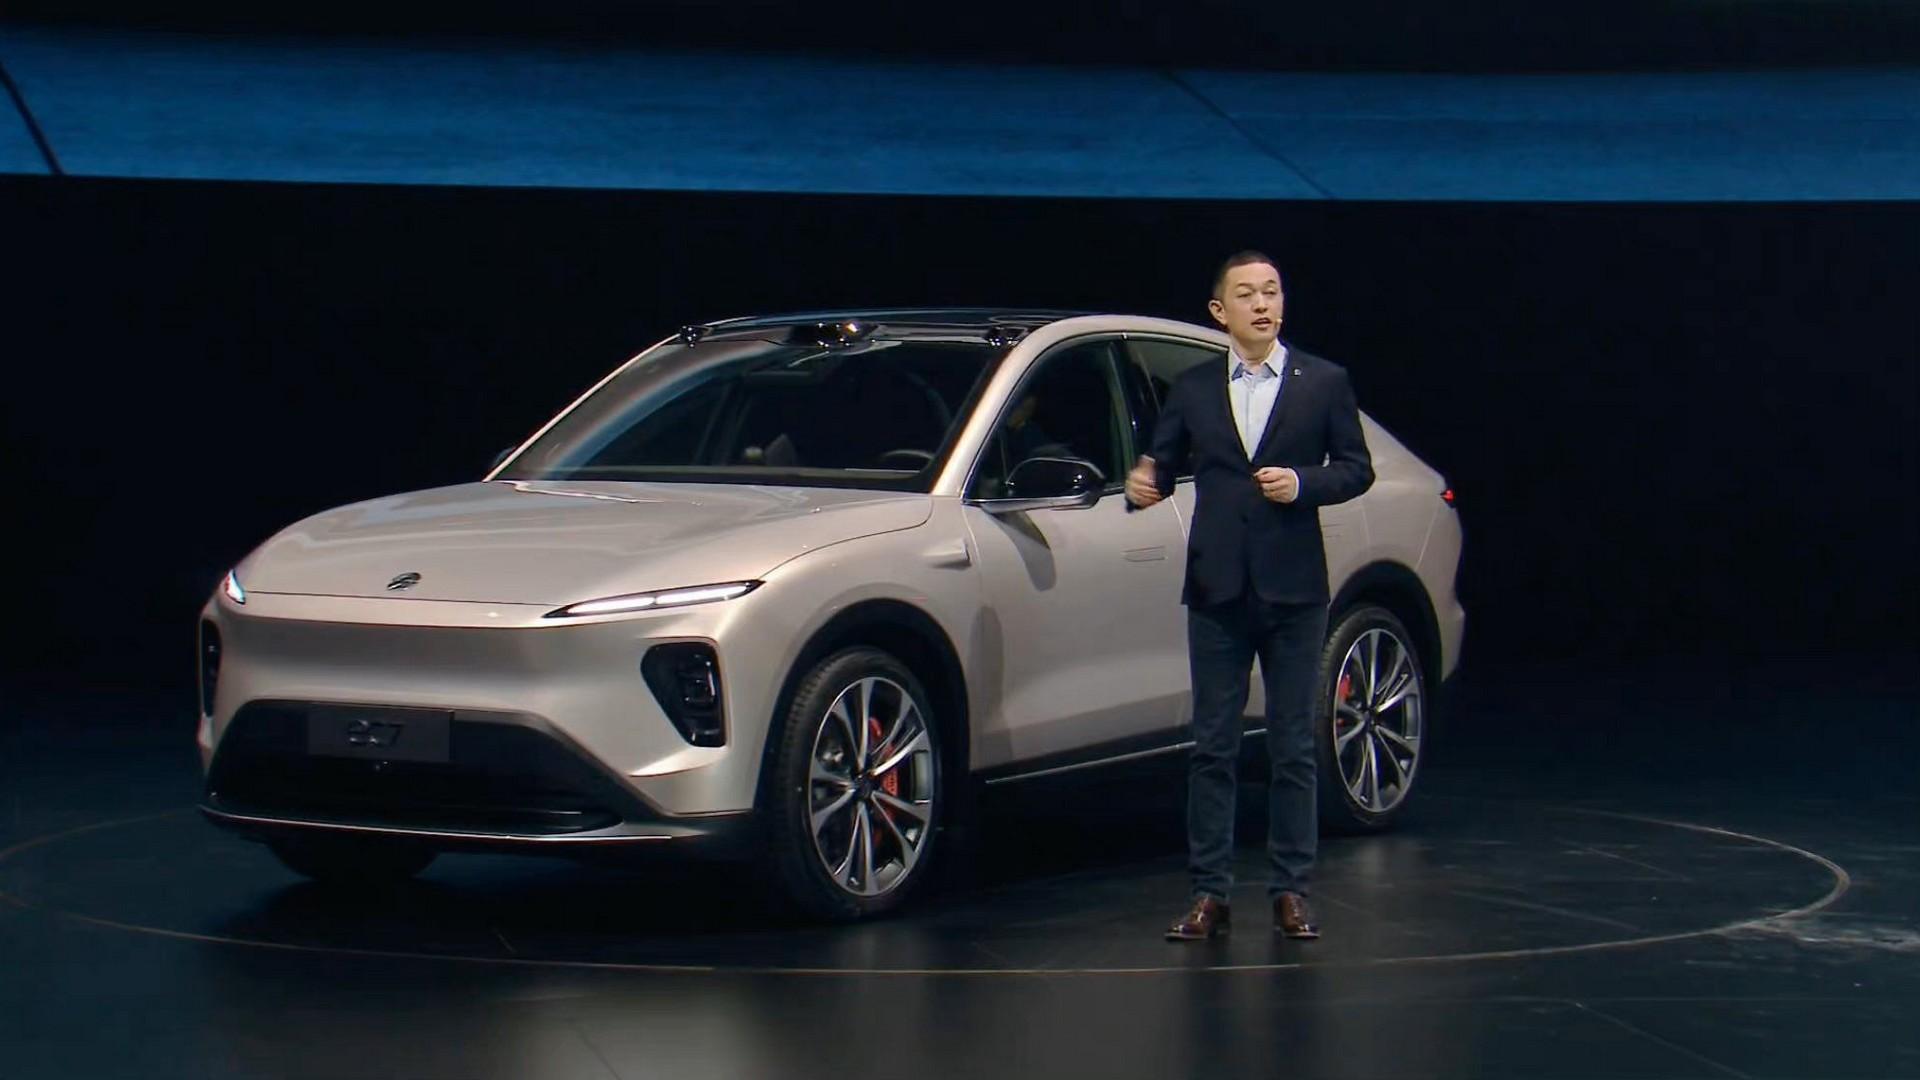 nio-introduces-the-ec7-and-all-new-es8-at-nio-day-2022-207174_1